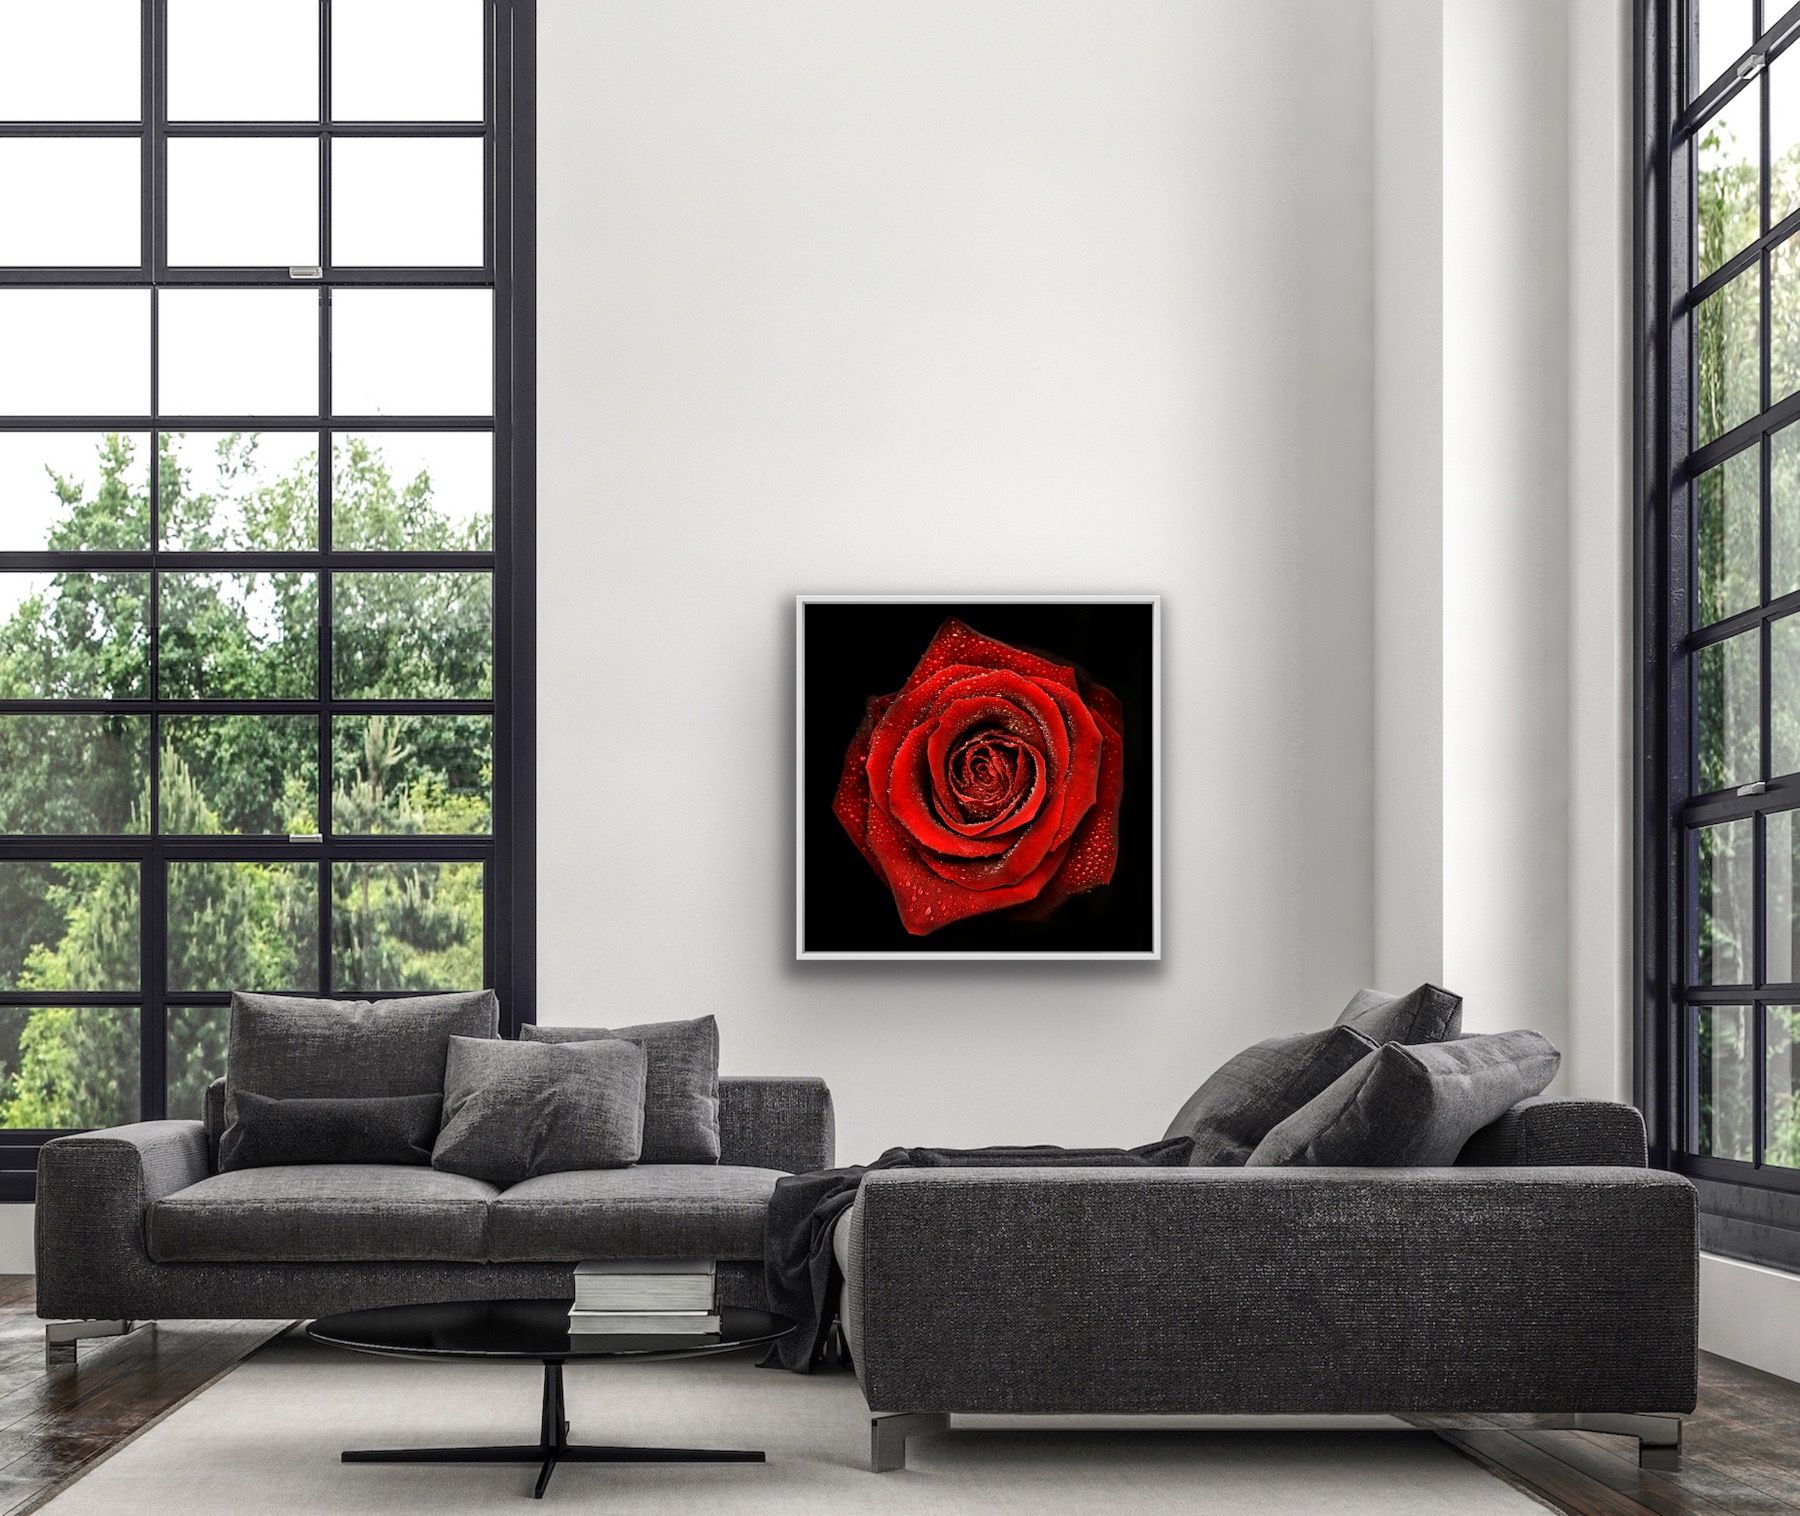 Rose N°2 by Allan Forsyth - Secondary Image